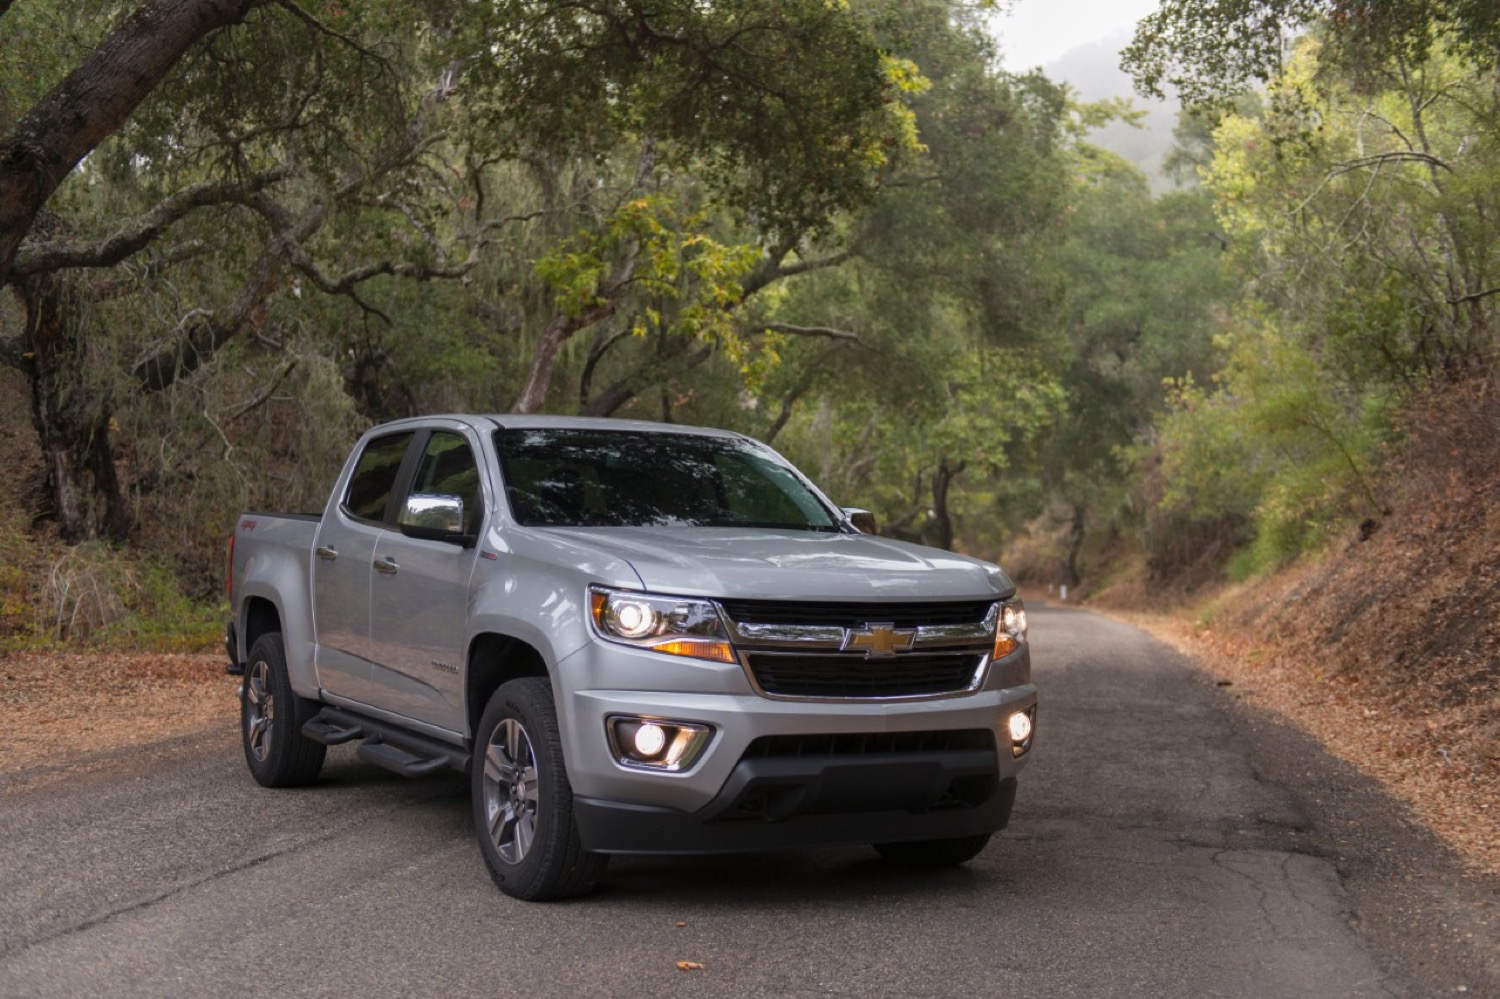 2017 Chevrolet Colorado Full Updates And Changes Revealed | GM Authority